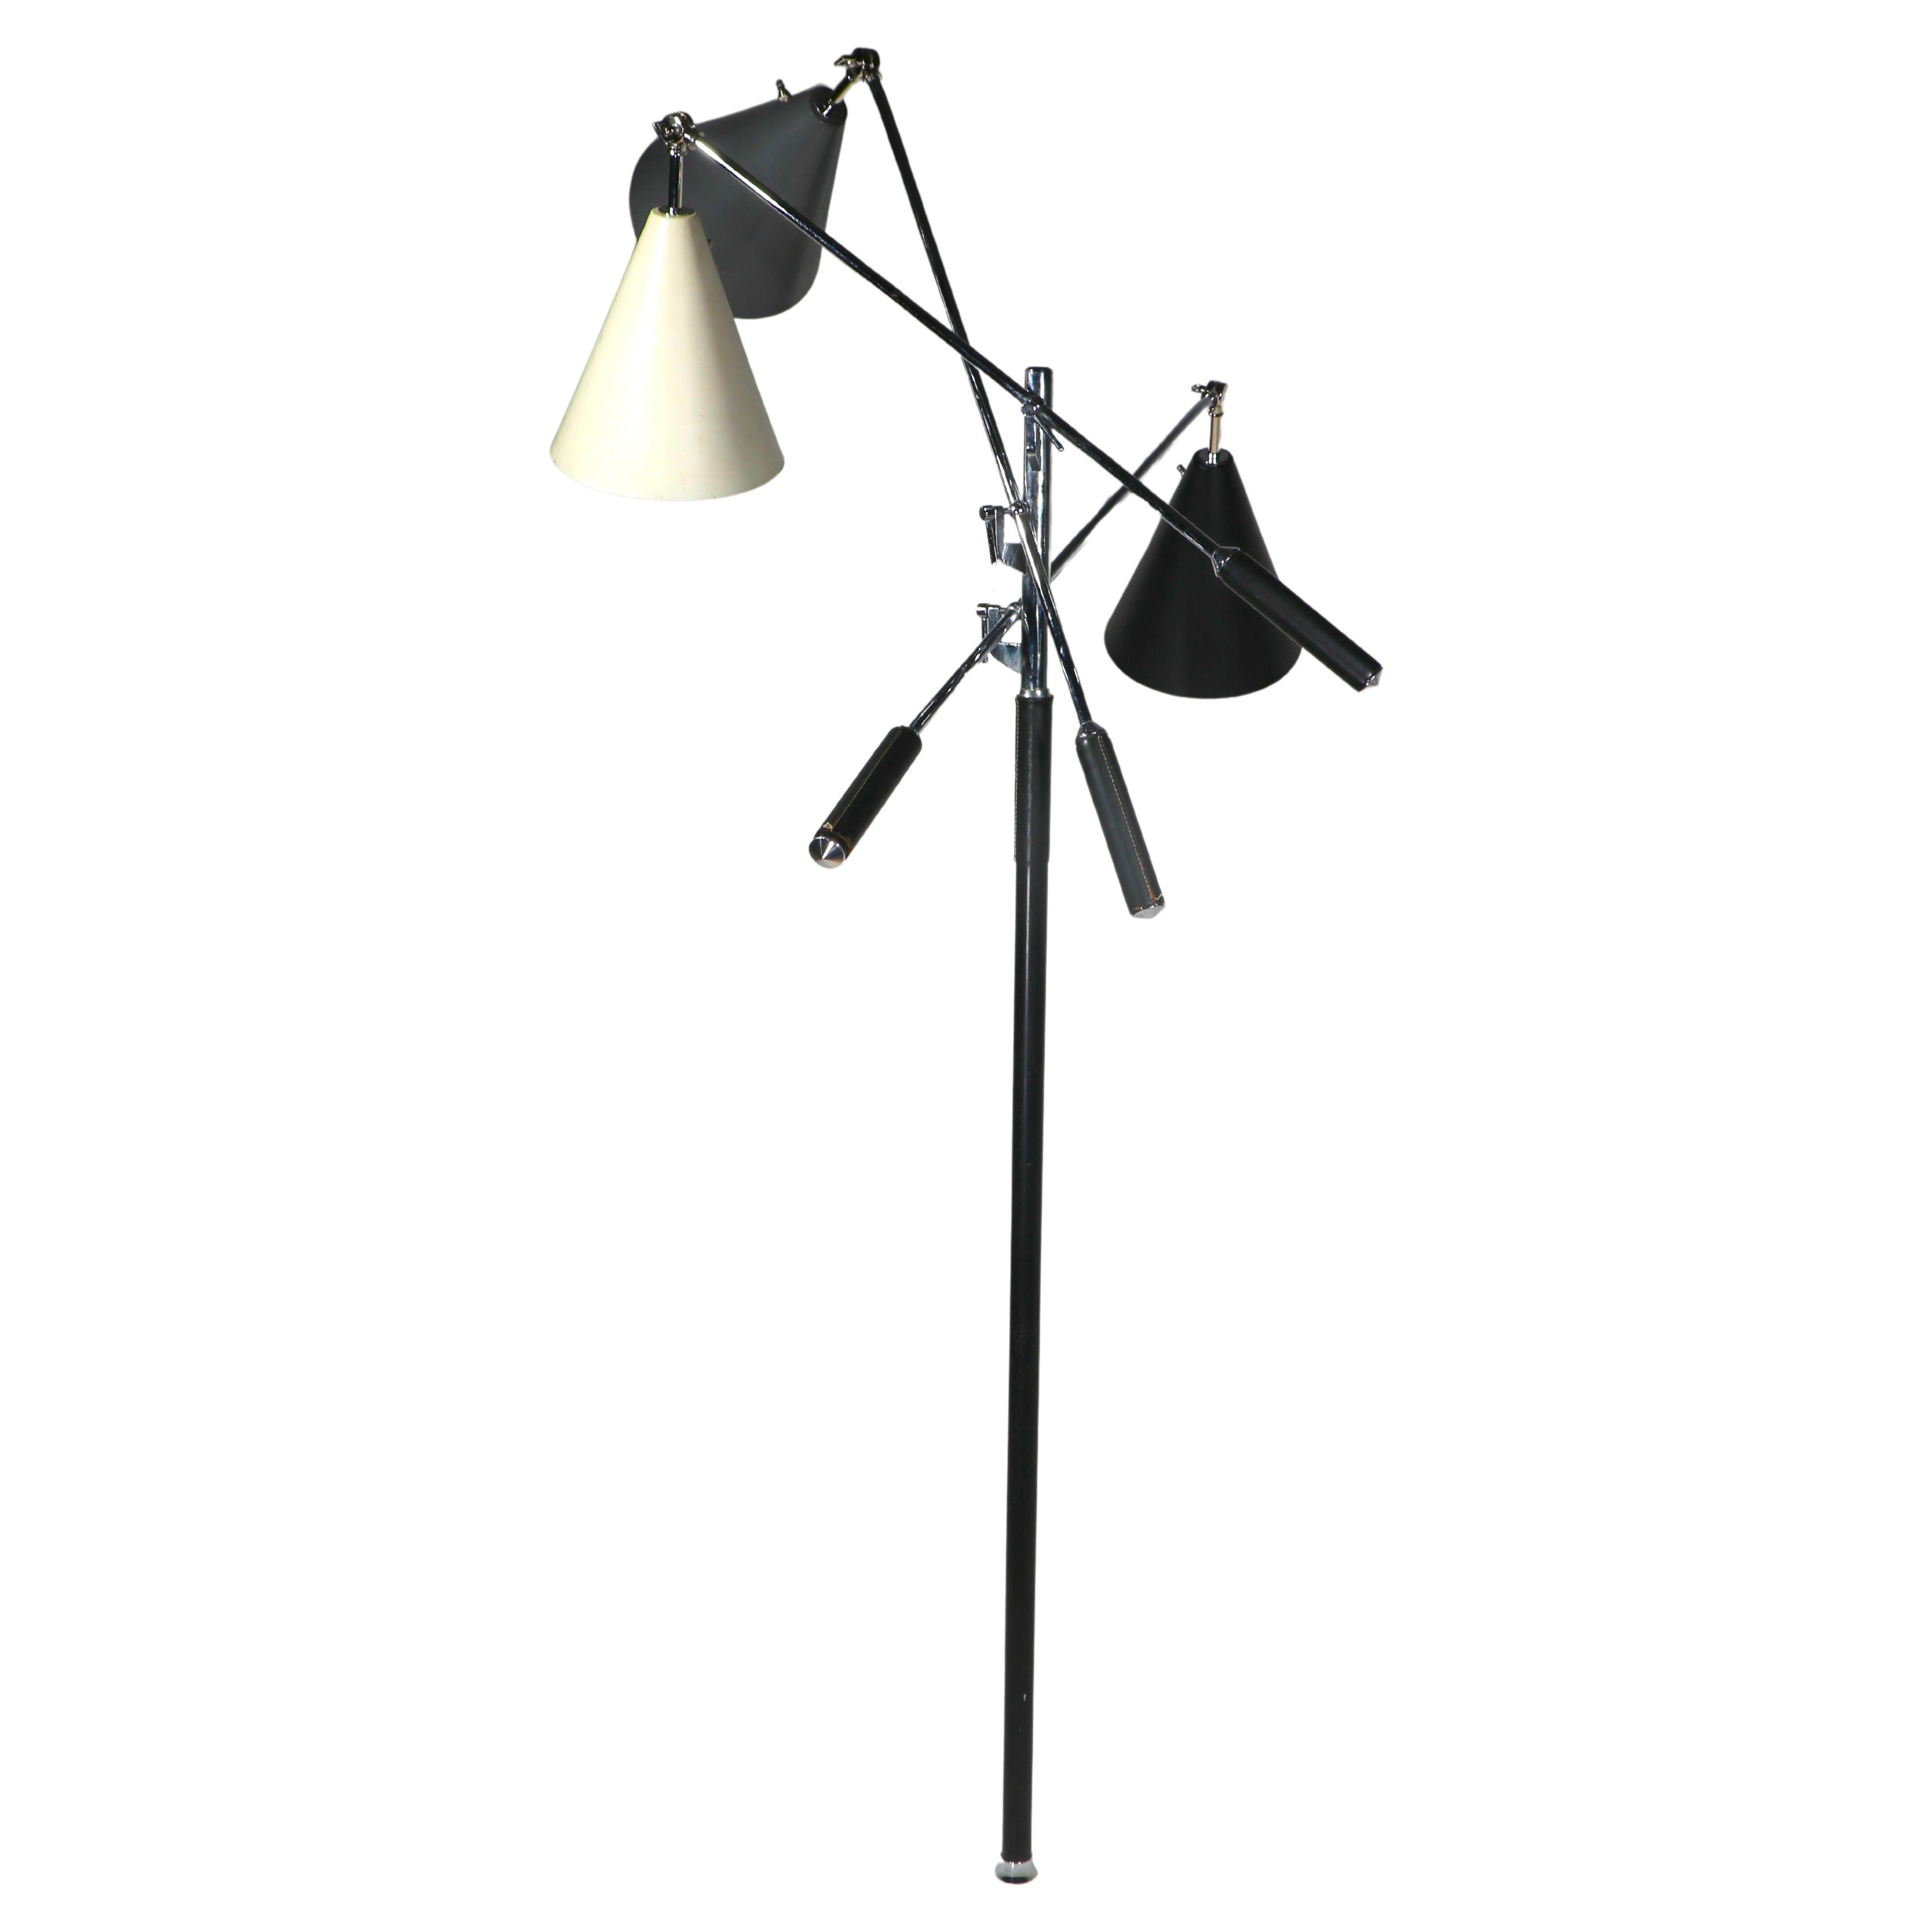 Iconic three light floor lamp, known as the Triennale, designed by Angelo Lelii, for Arredoluce, this example is marked  Made in Italy on the base and chrome figments. 
The lamp features three counter balanced arms with cone shades, one black, one